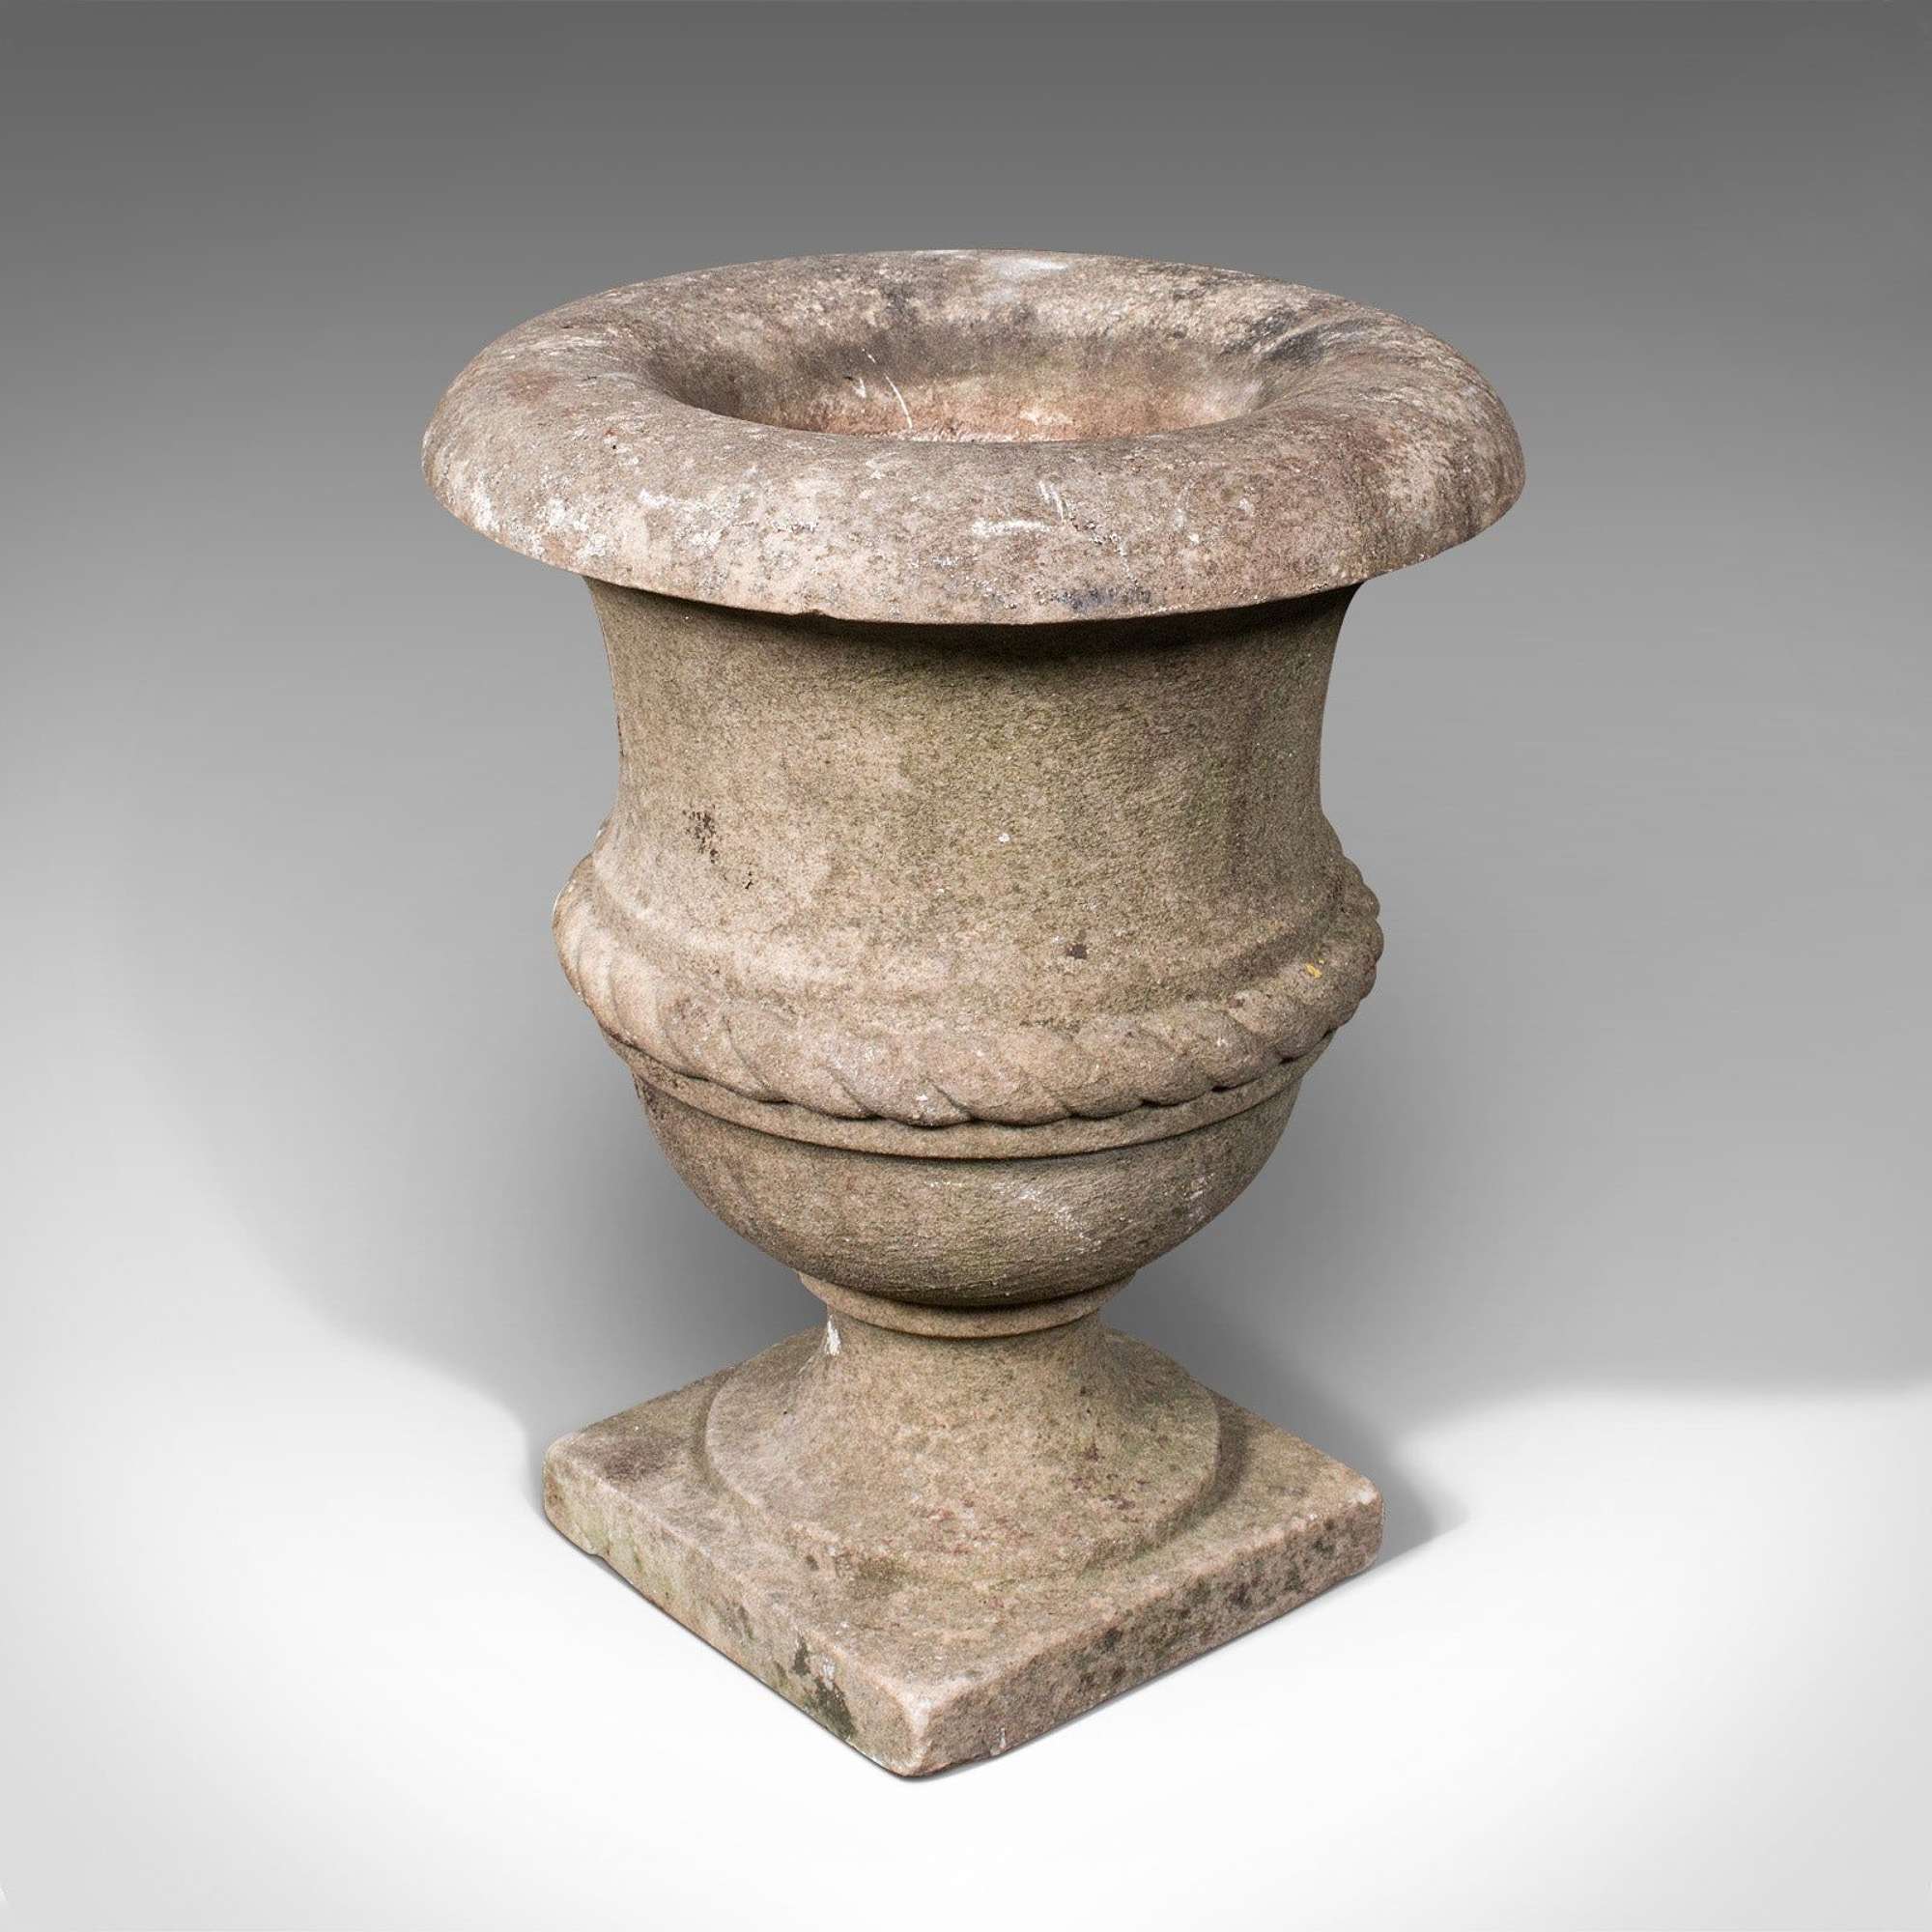 Small Antique Planting Urn, English, Weathered Marble, Jardiniere, Victorian